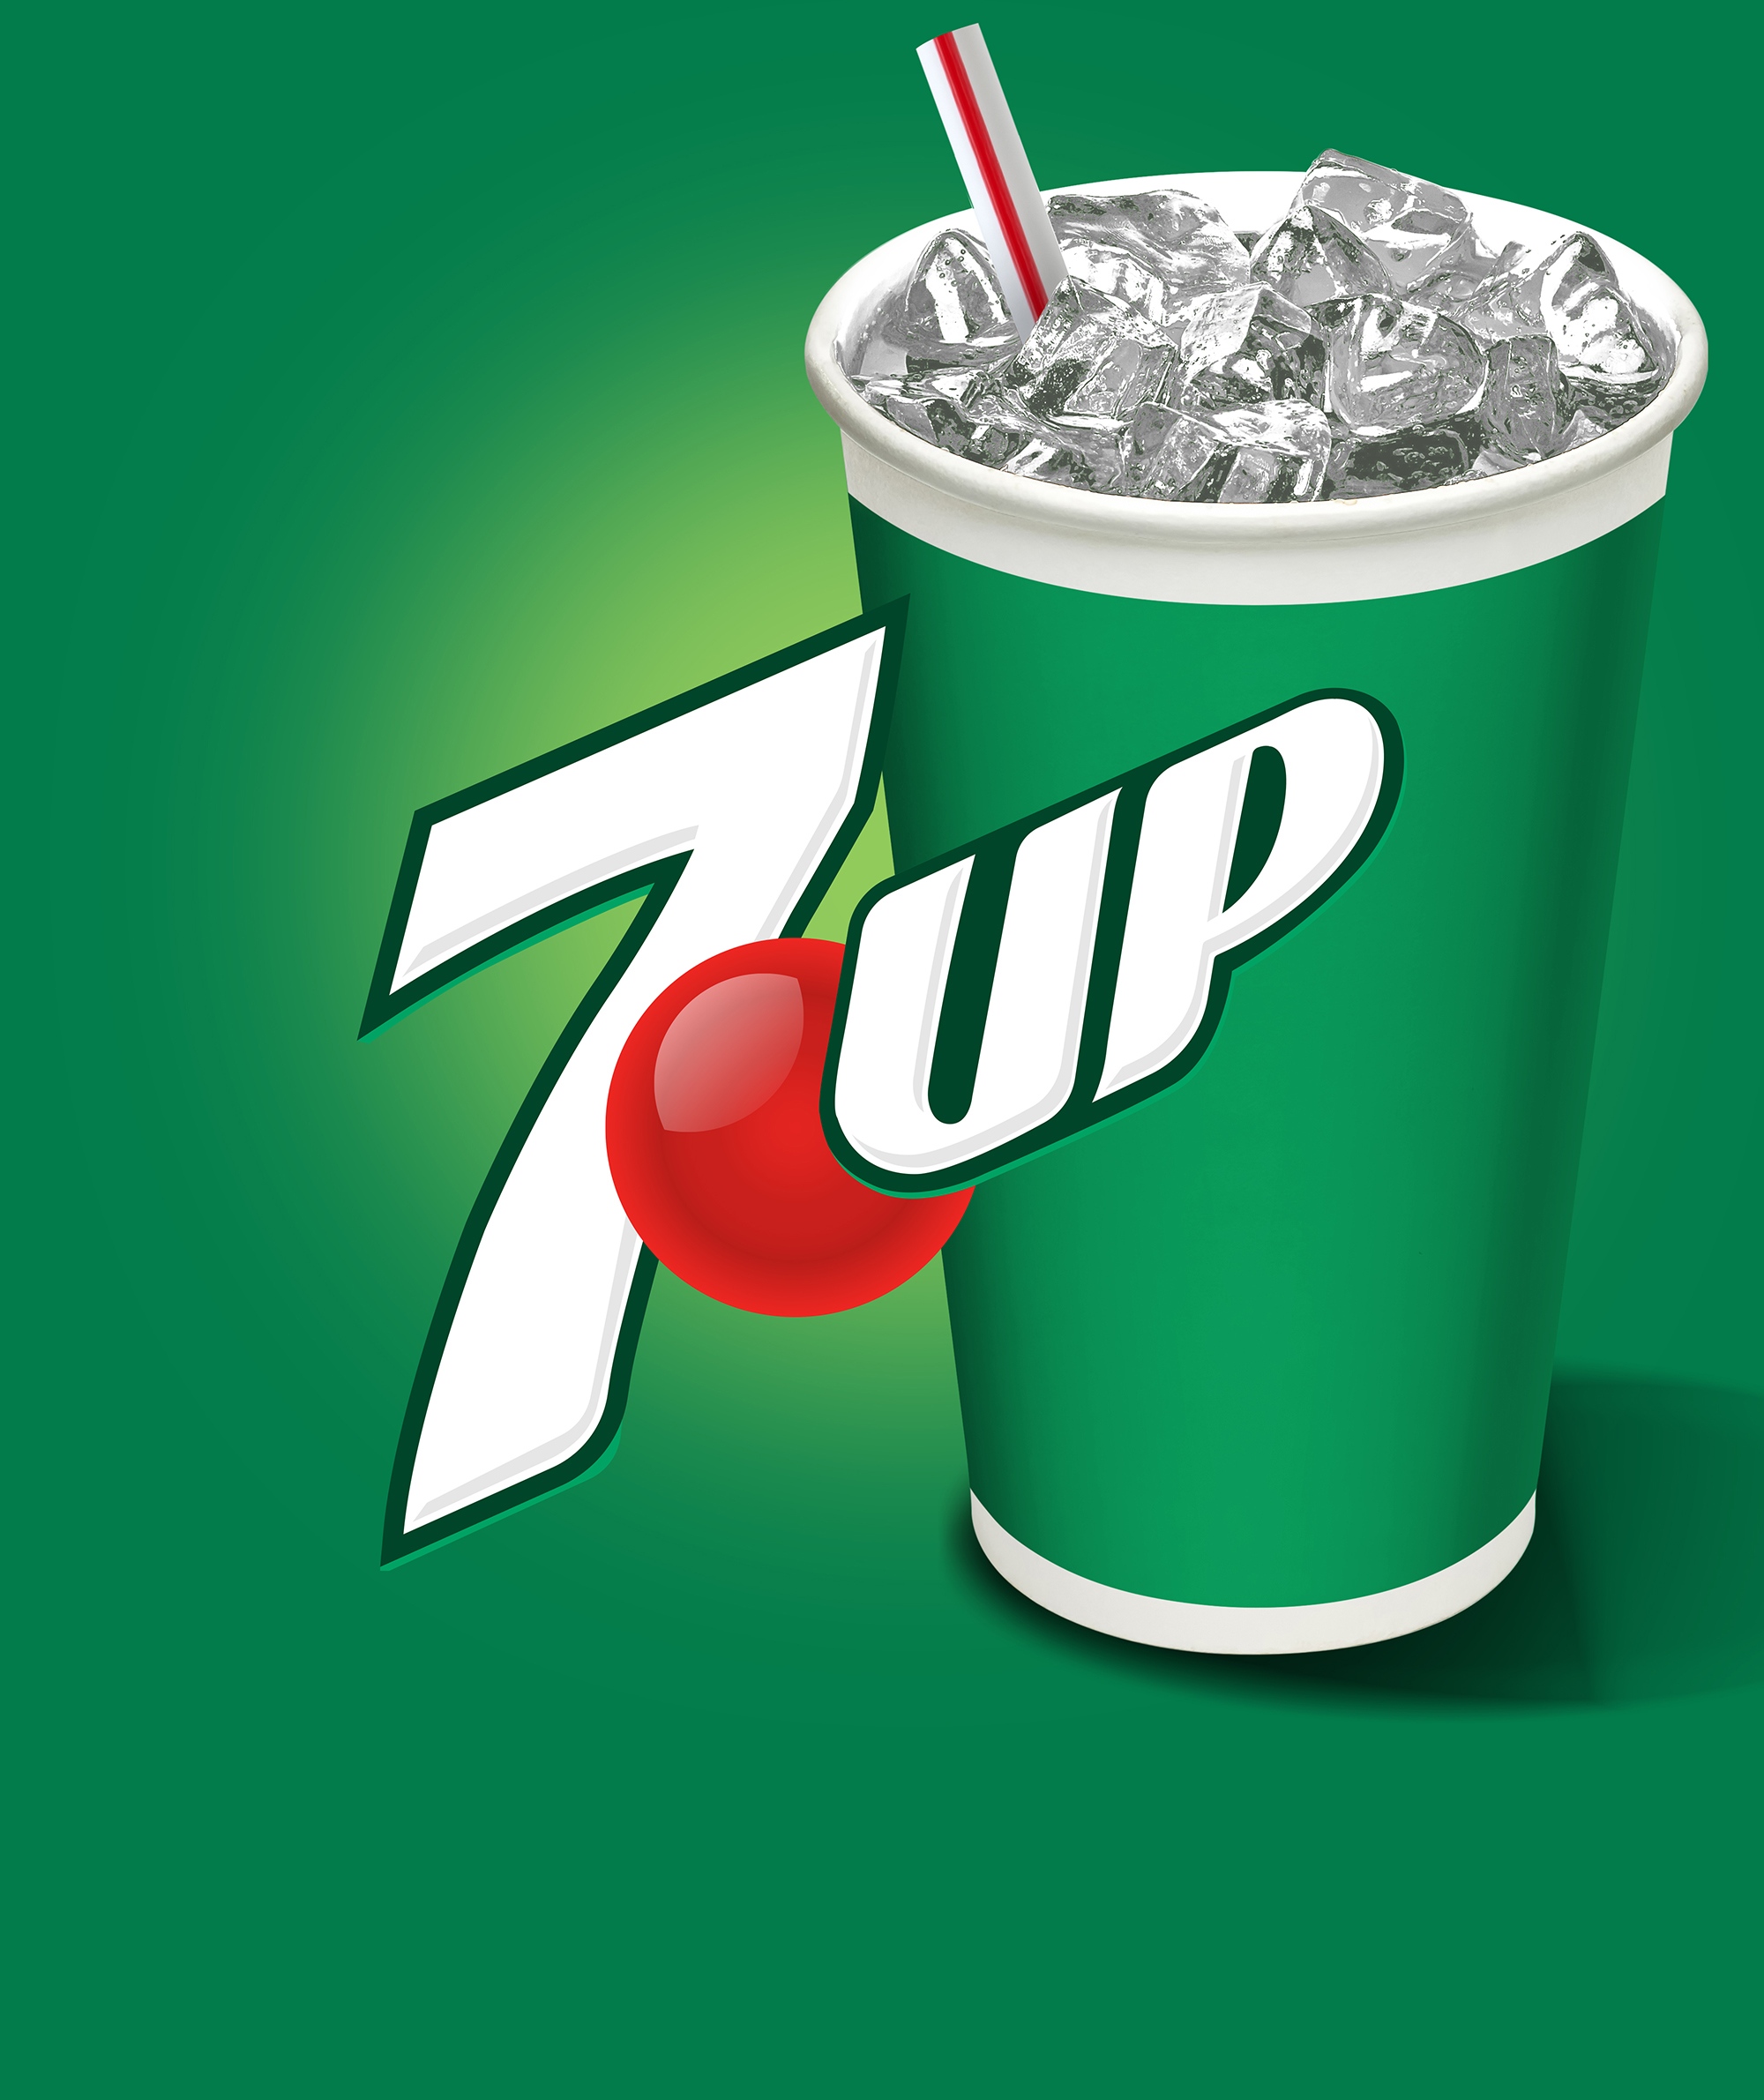 Flavor Smart Nationally Branded Products - 7UP